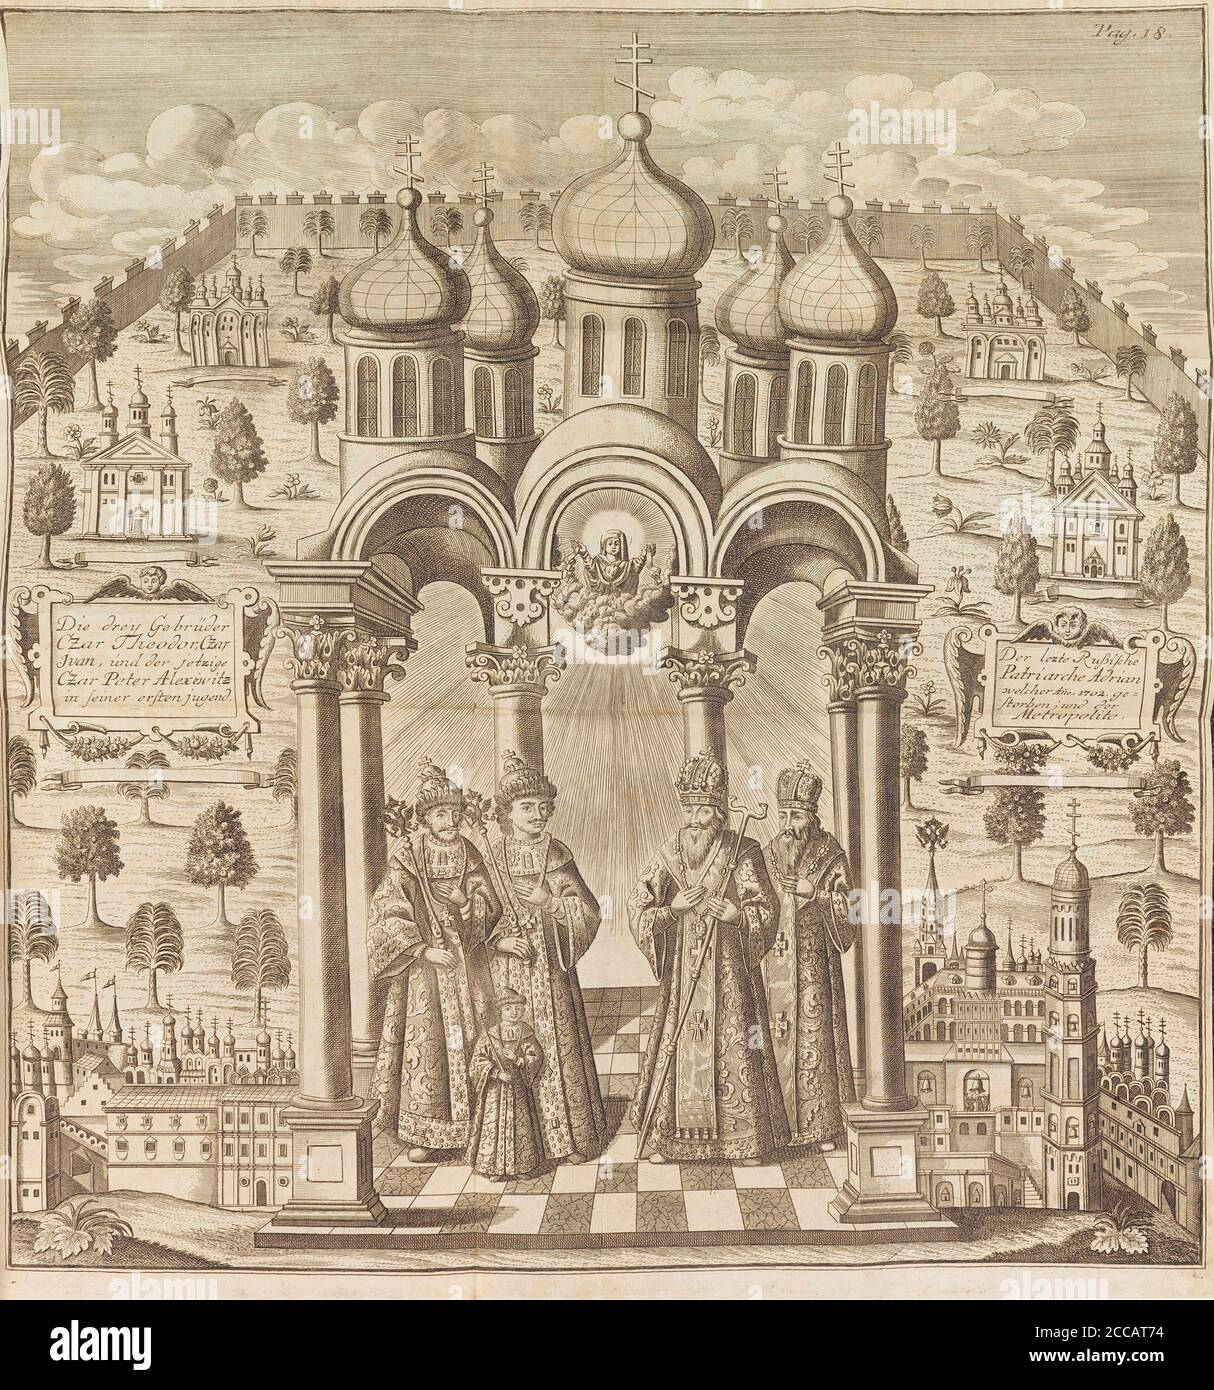 Feodor III, Peter I, Ivan V and Patriarch Adrian I. From "Das veraenderte Russland" (The Present State of Russia). Museum: PRIVATE COLLECTION. Author: Friedrich Christian Weber. Stock Photo